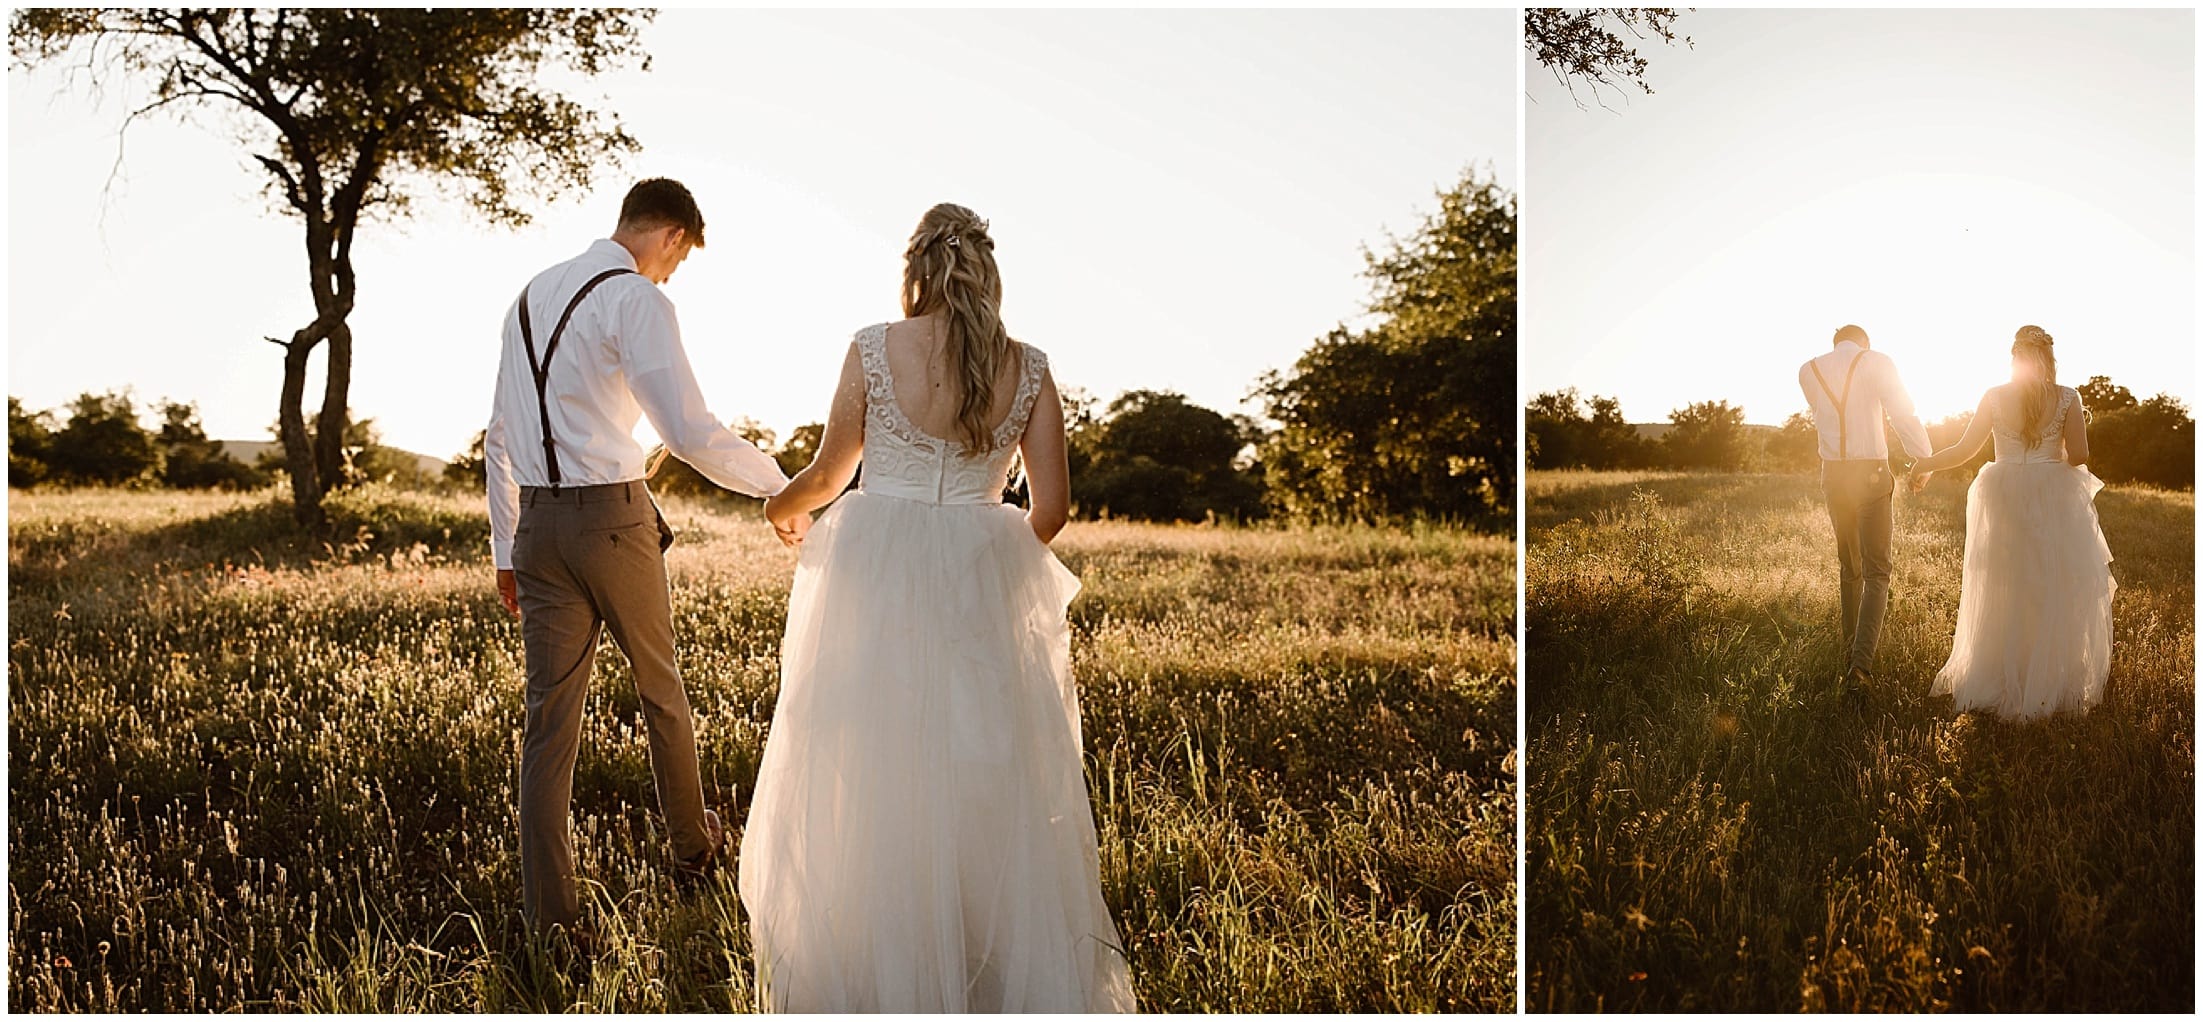 bride and groom intimate photos in texas sunset field, Brit Nicole Photography, West Texas Barn Wedding, West Texas Small Wedding, West Texas wedding venue, DJ Platinum, Vera Wang engagement ring, Zales Manly Bands wedding ring, David's Bridal wedding dress, Krazy Cakes brides wedding cake, wedding cupcake, Betsey Johnson wedding high heels, Joy's Downtown Flowers wedding decor, Sparrow Creek Ranch, texas wedding ranch, places to get married in Texas, small intimate wedding, summer wedding, texas sky, bride and groom first look, first look with dad, matching bridesmaids robes, June wedding, junebug weddings, wandering weddings, the knot, best weddings